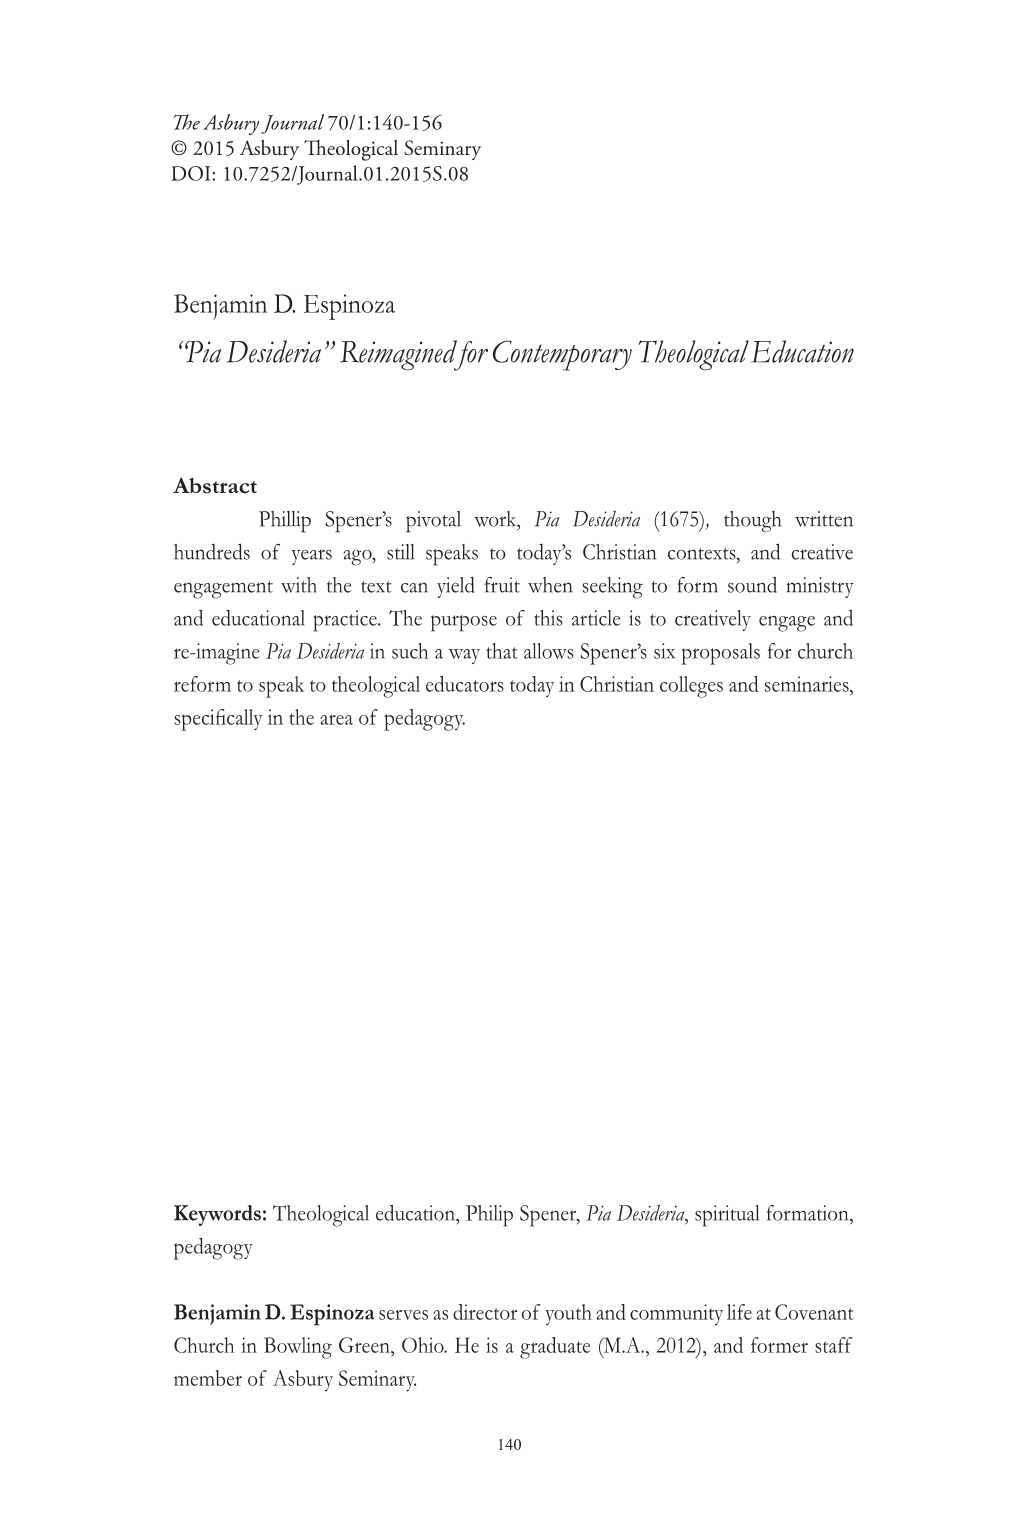 “Pia Desideria” Reimagined for Contemporary Theological Education